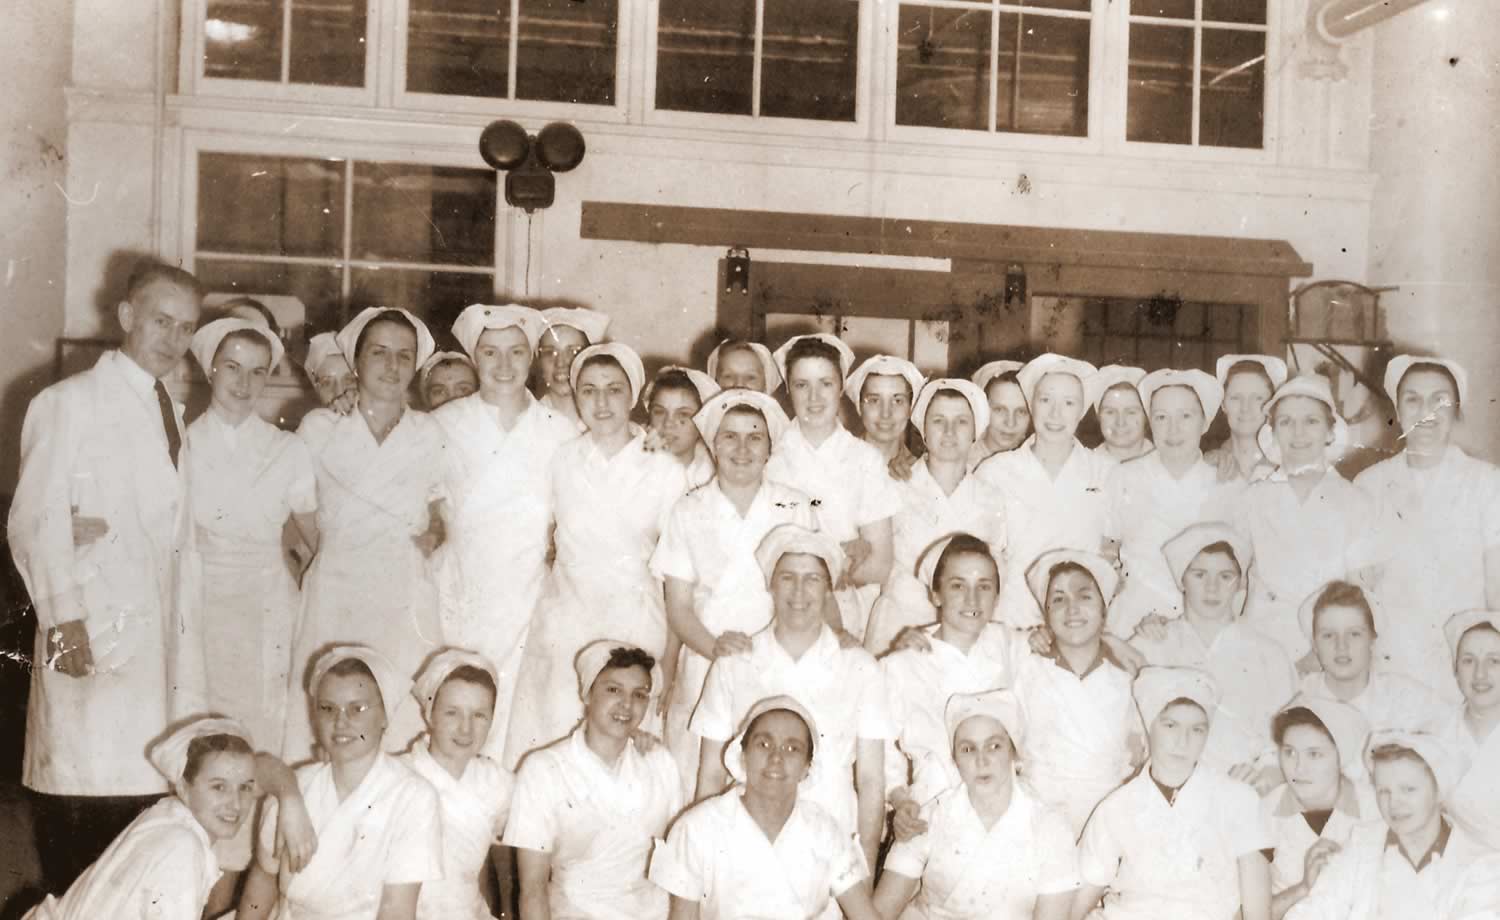 Black and white group photograph of a large group of female factory workers in uniform and one man. All the workers are wearing white jackets and head coverings.